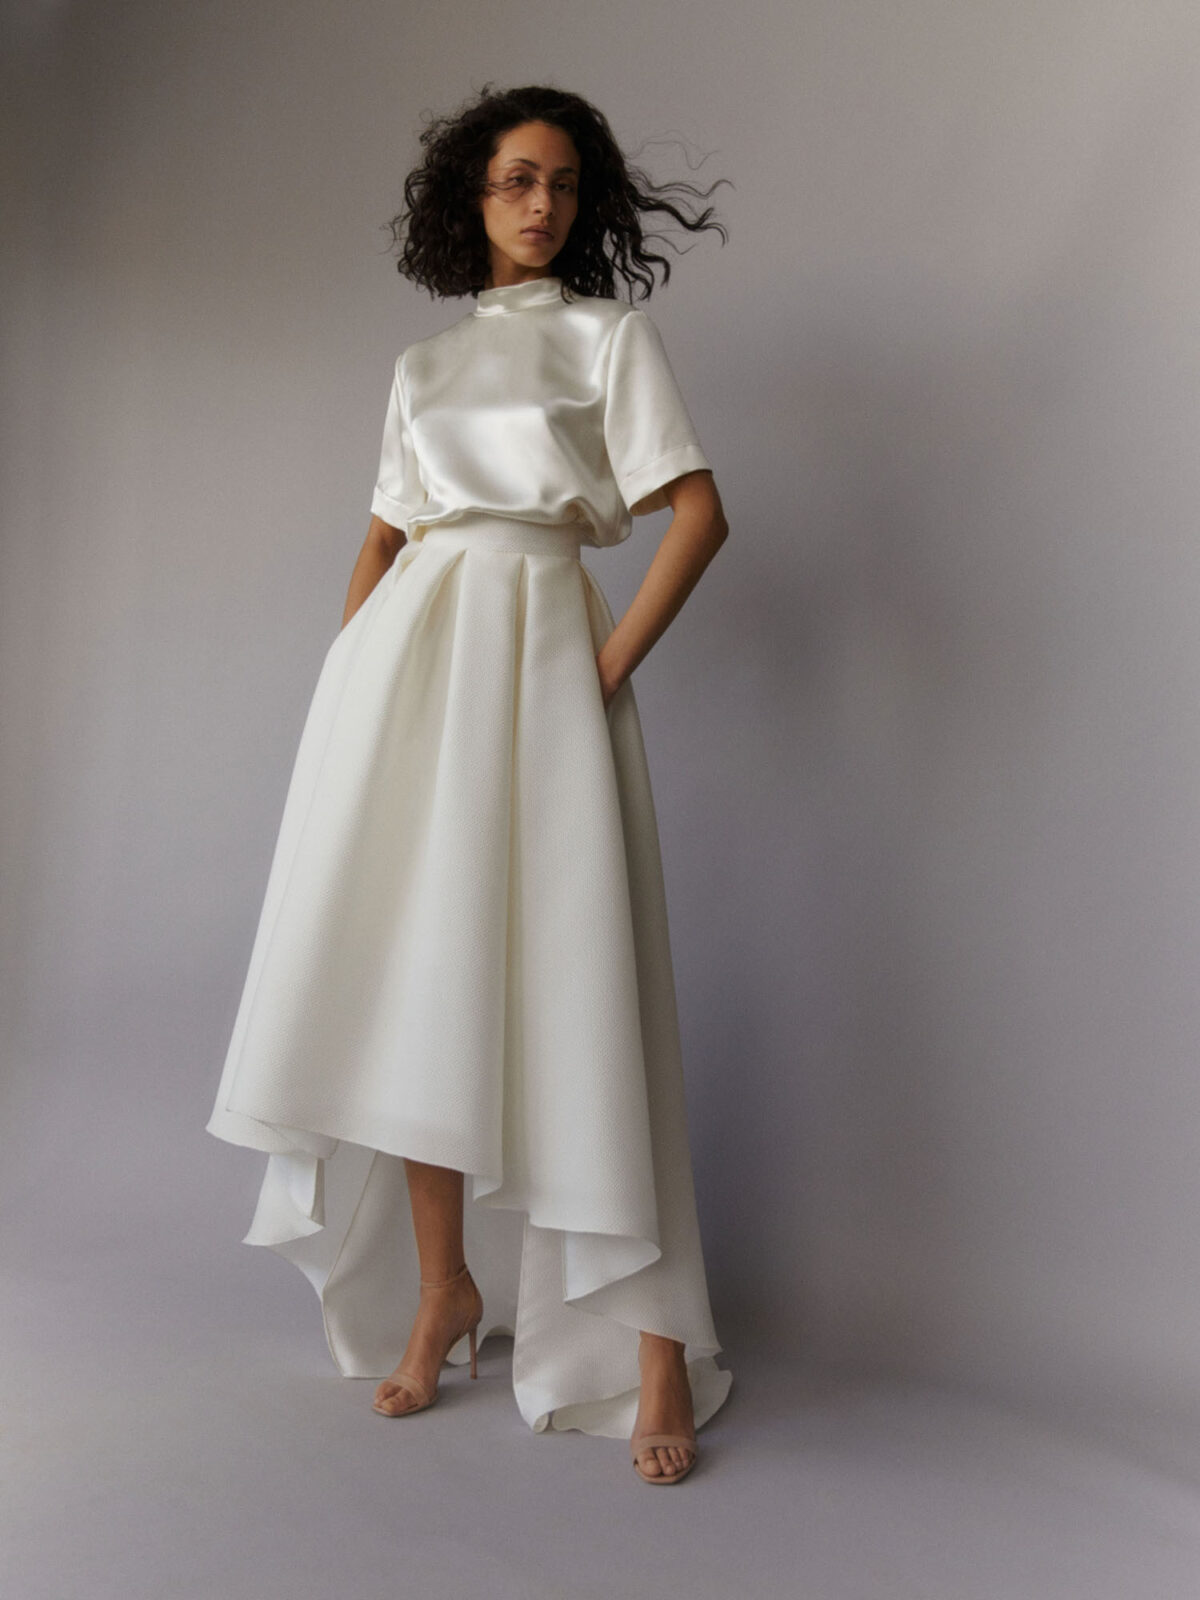 ivory high-low skirt in jacquard and high collar top in double satin